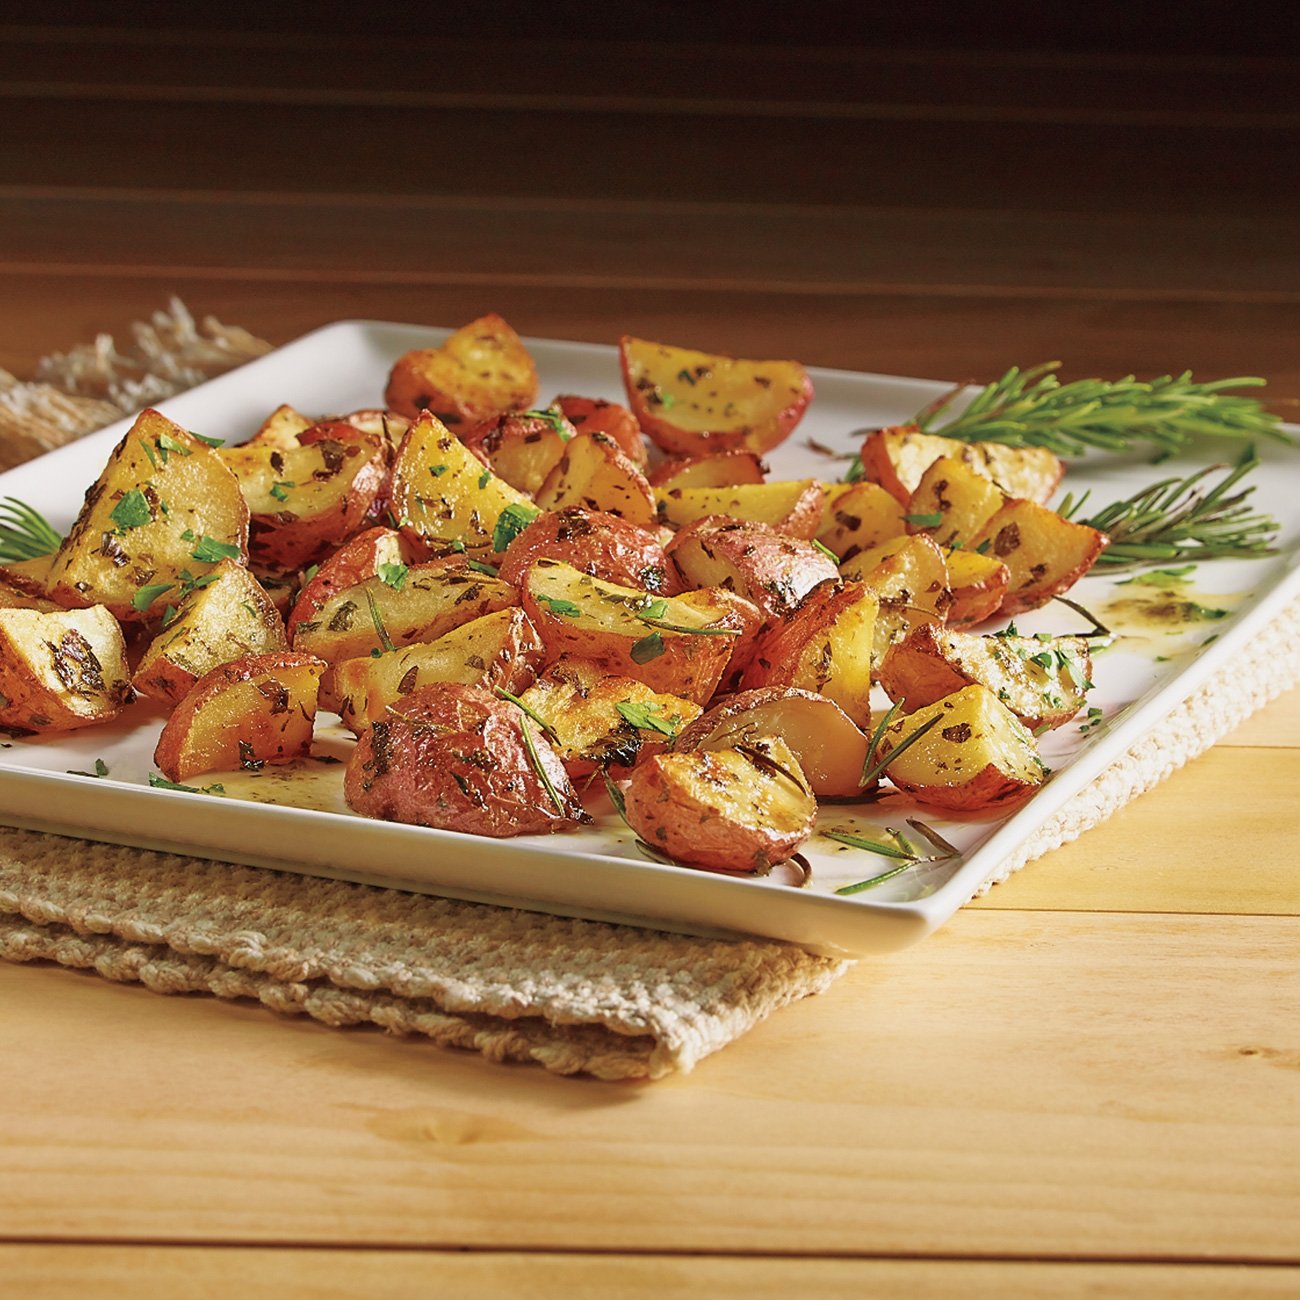 https://images.heb.com/is/image/HEBGrocery/recipe-hm-large/crispy-potatoes-with-roasted-garlic-and-rosemary-recipe.jpg